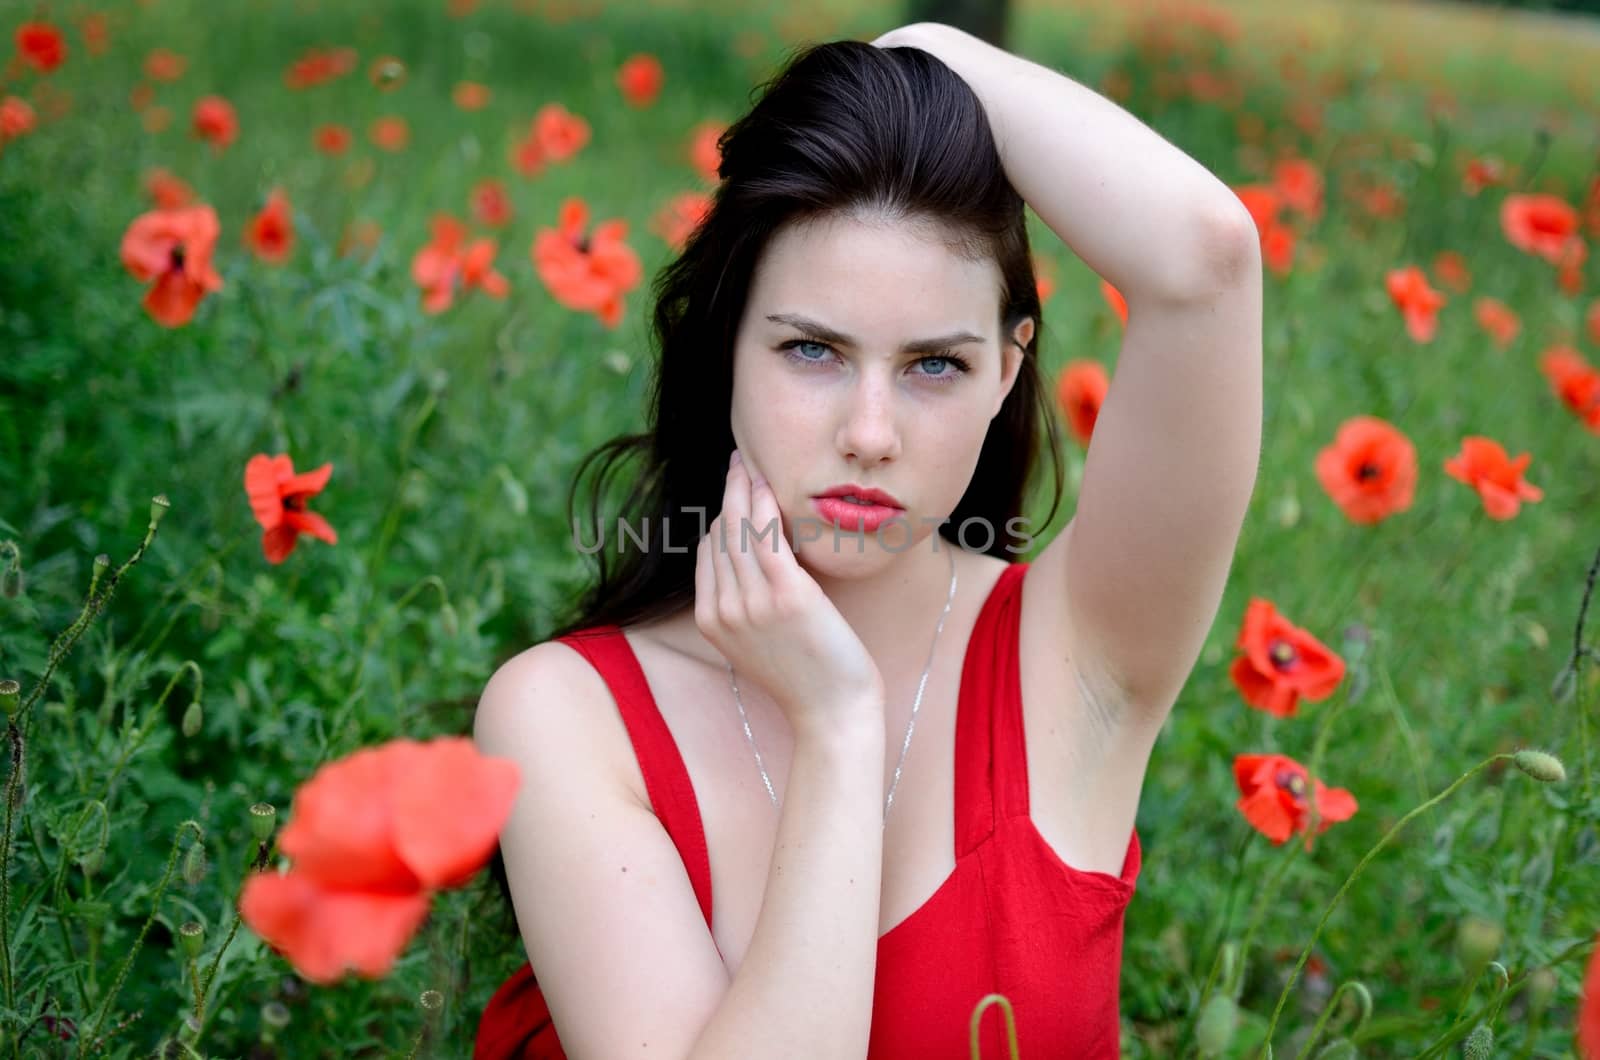 Pretty female model posing with poppies flowers in meadow. Girl putting her hand in hairs.